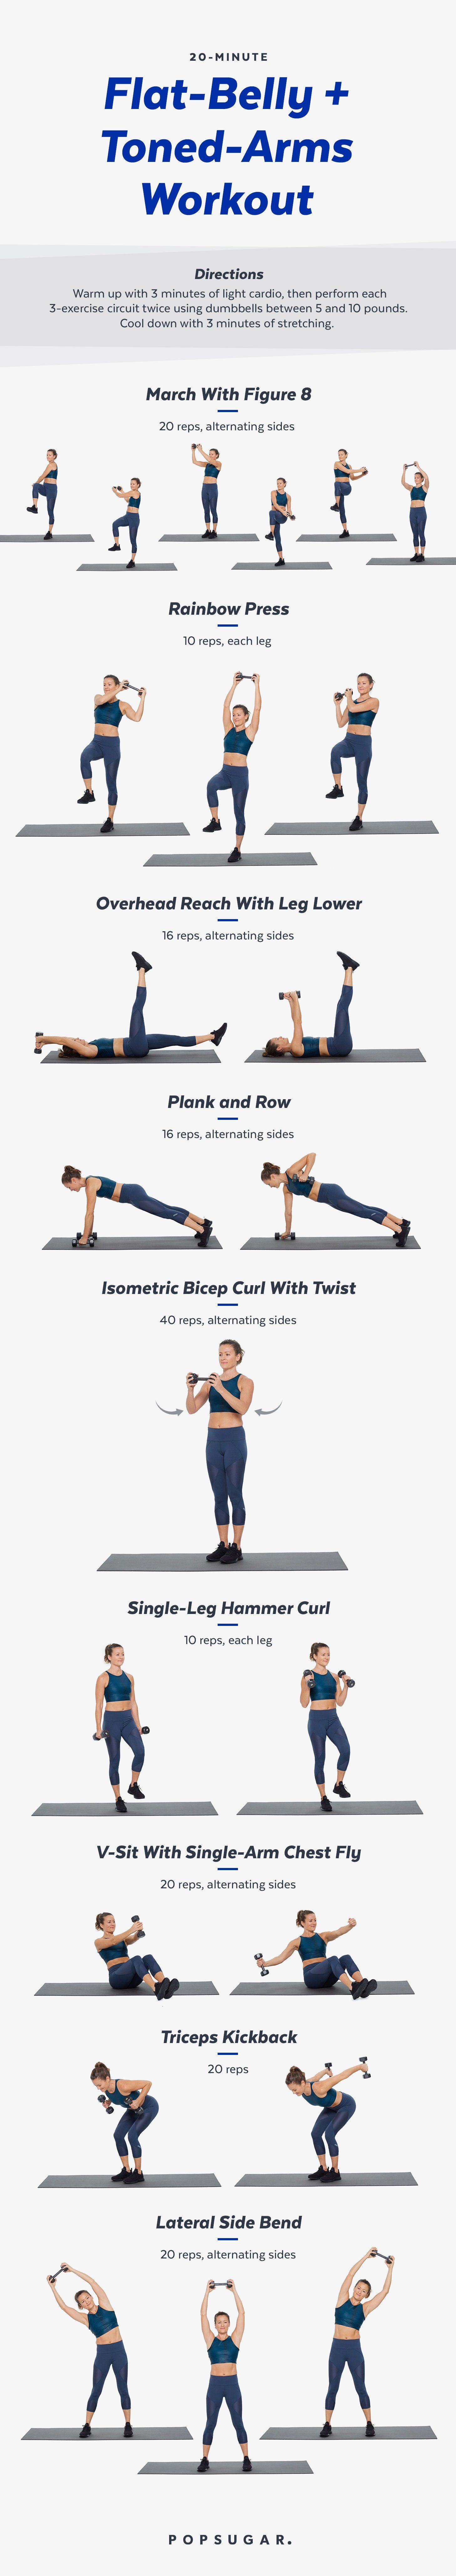 20-Minute Arms and Abs Workout With Weights | POPSUGAR Fitness